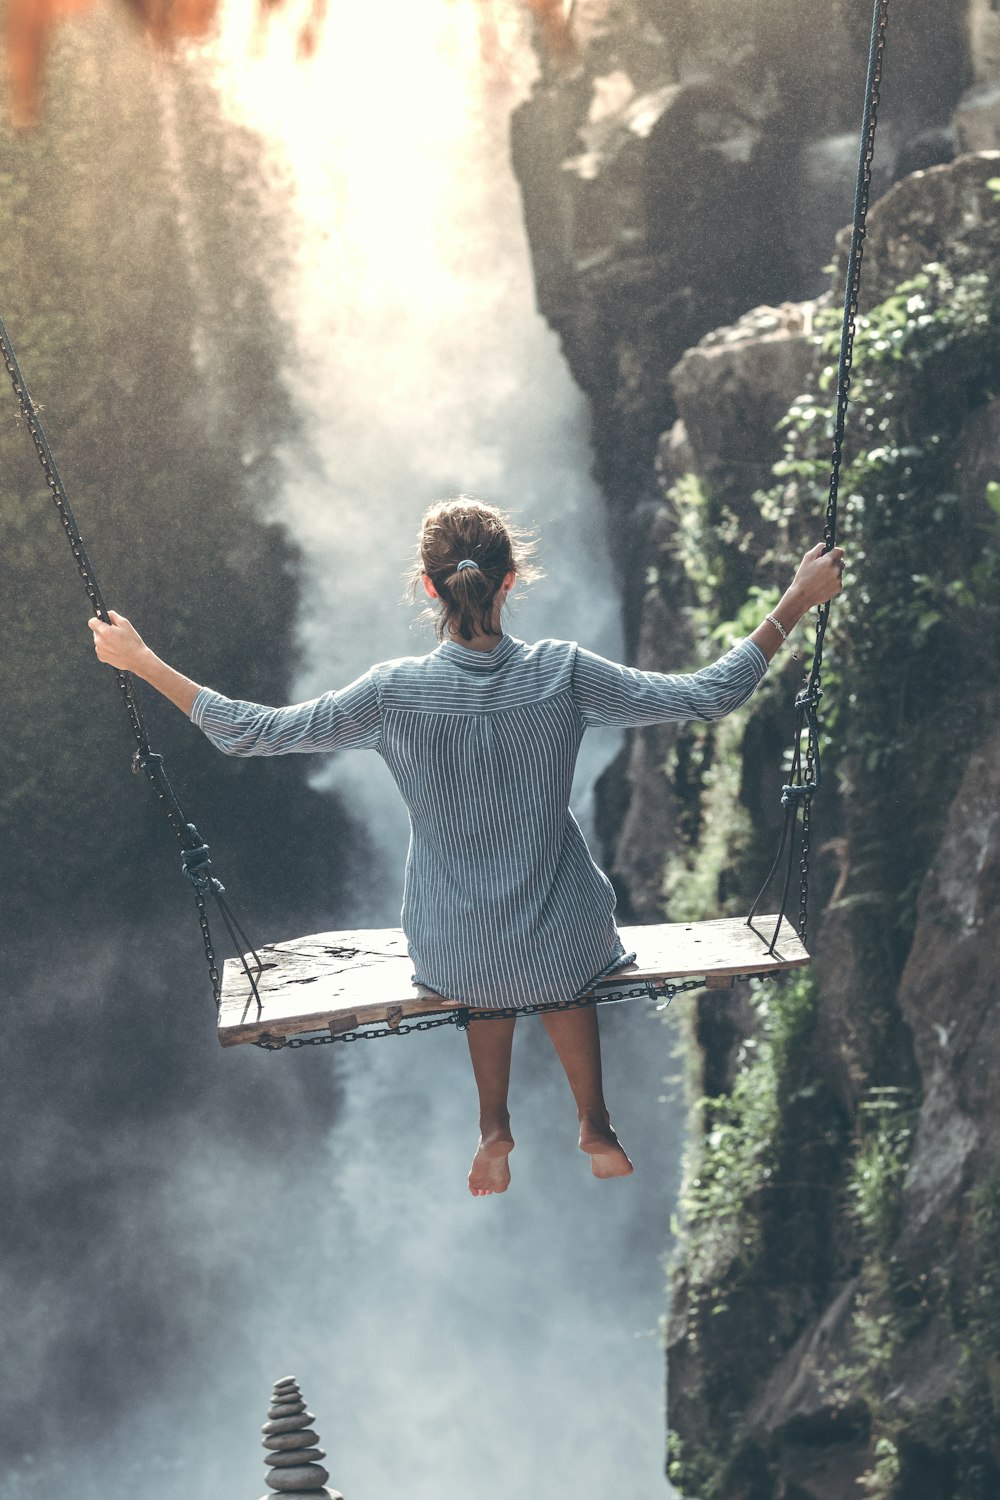 woman riding on wooden swing